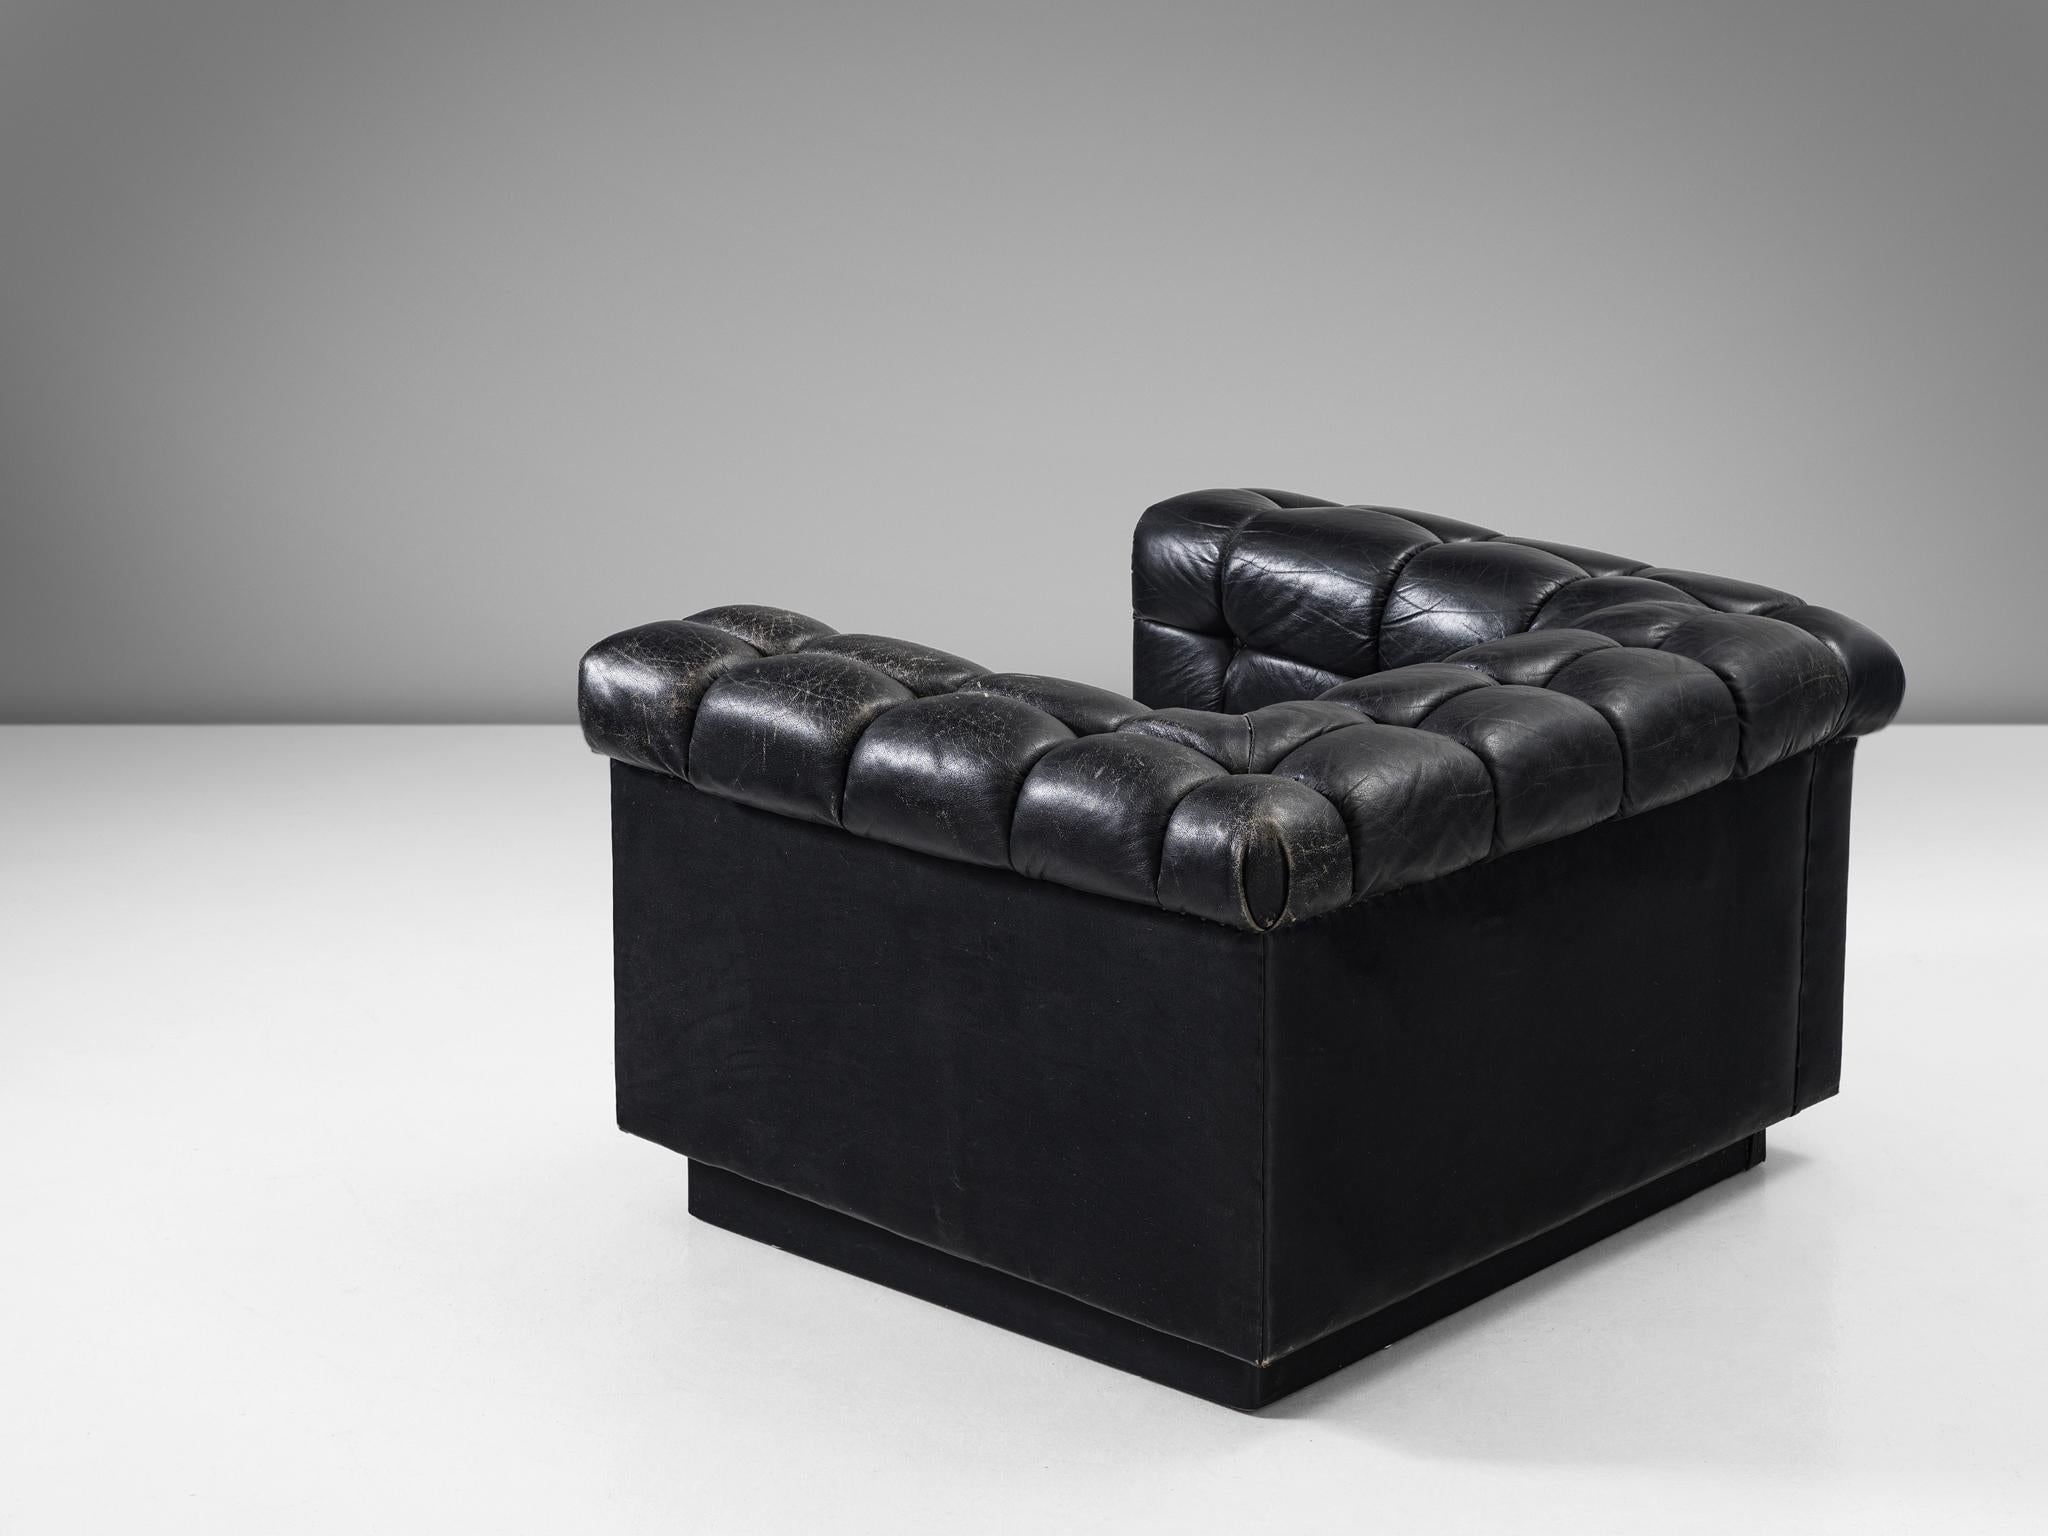 Mid-20th Century Edward Wormley for Dunbar Tufted 'Party' Club Chair in Black Leather For Sale